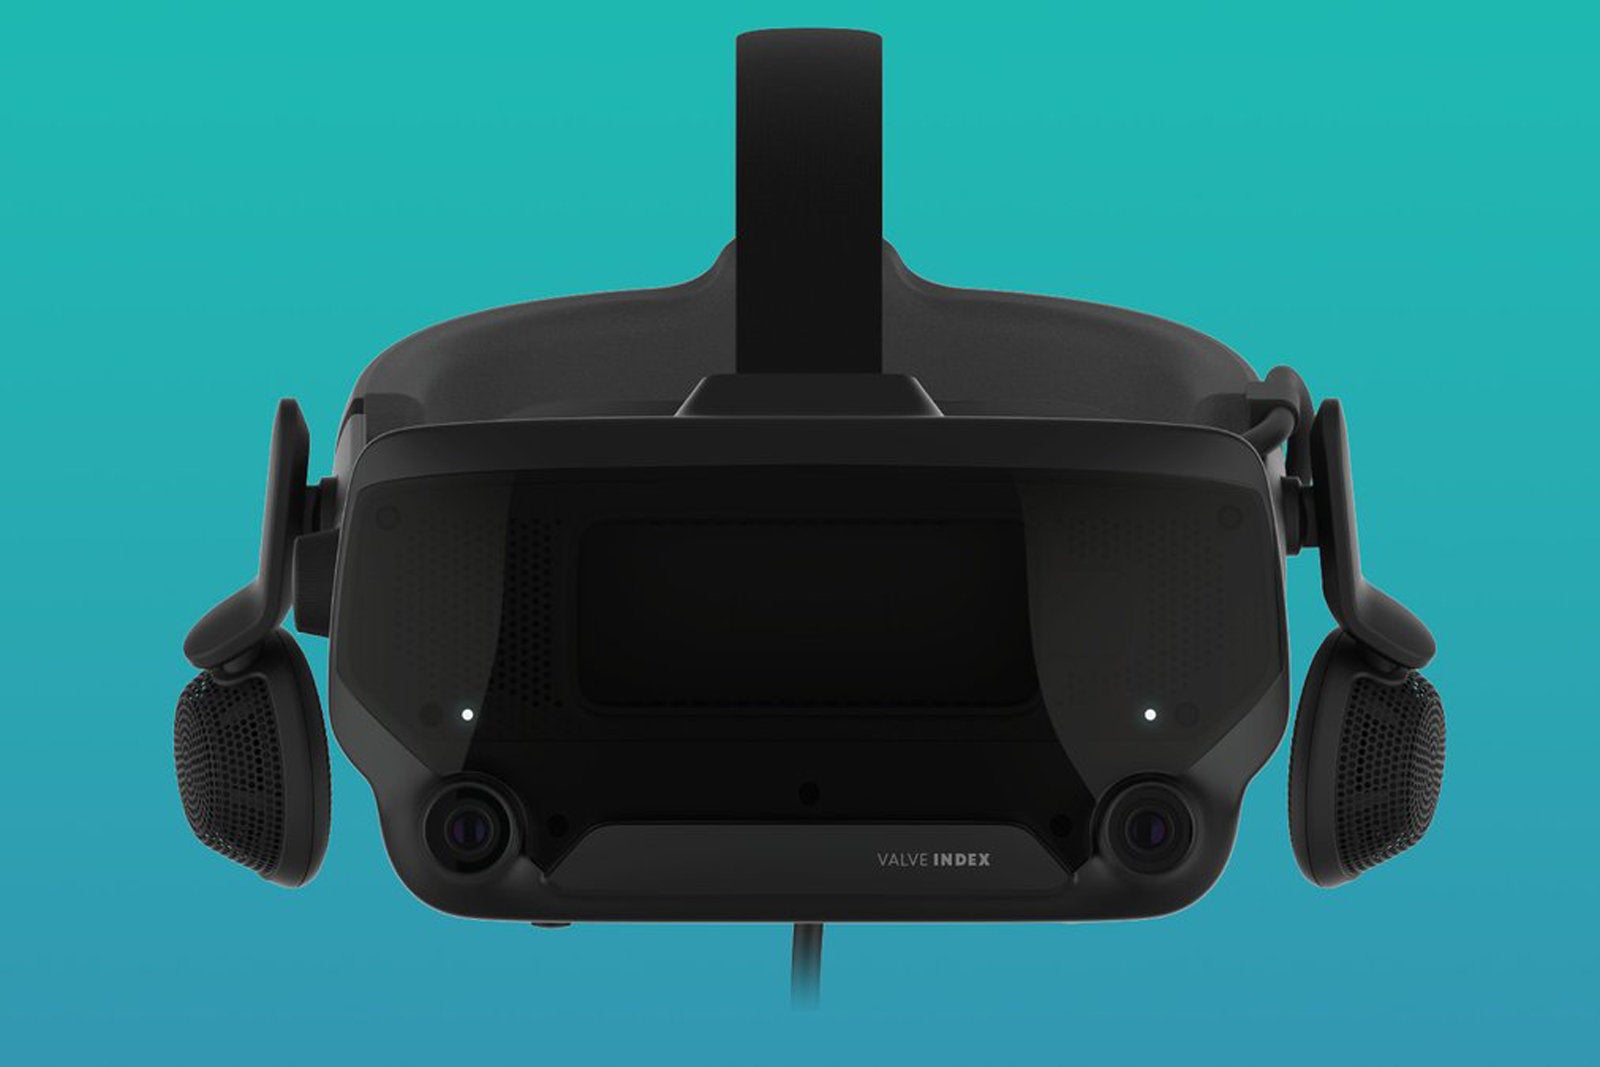 Valve Index sales more than doubled following Half-Life Alyx 